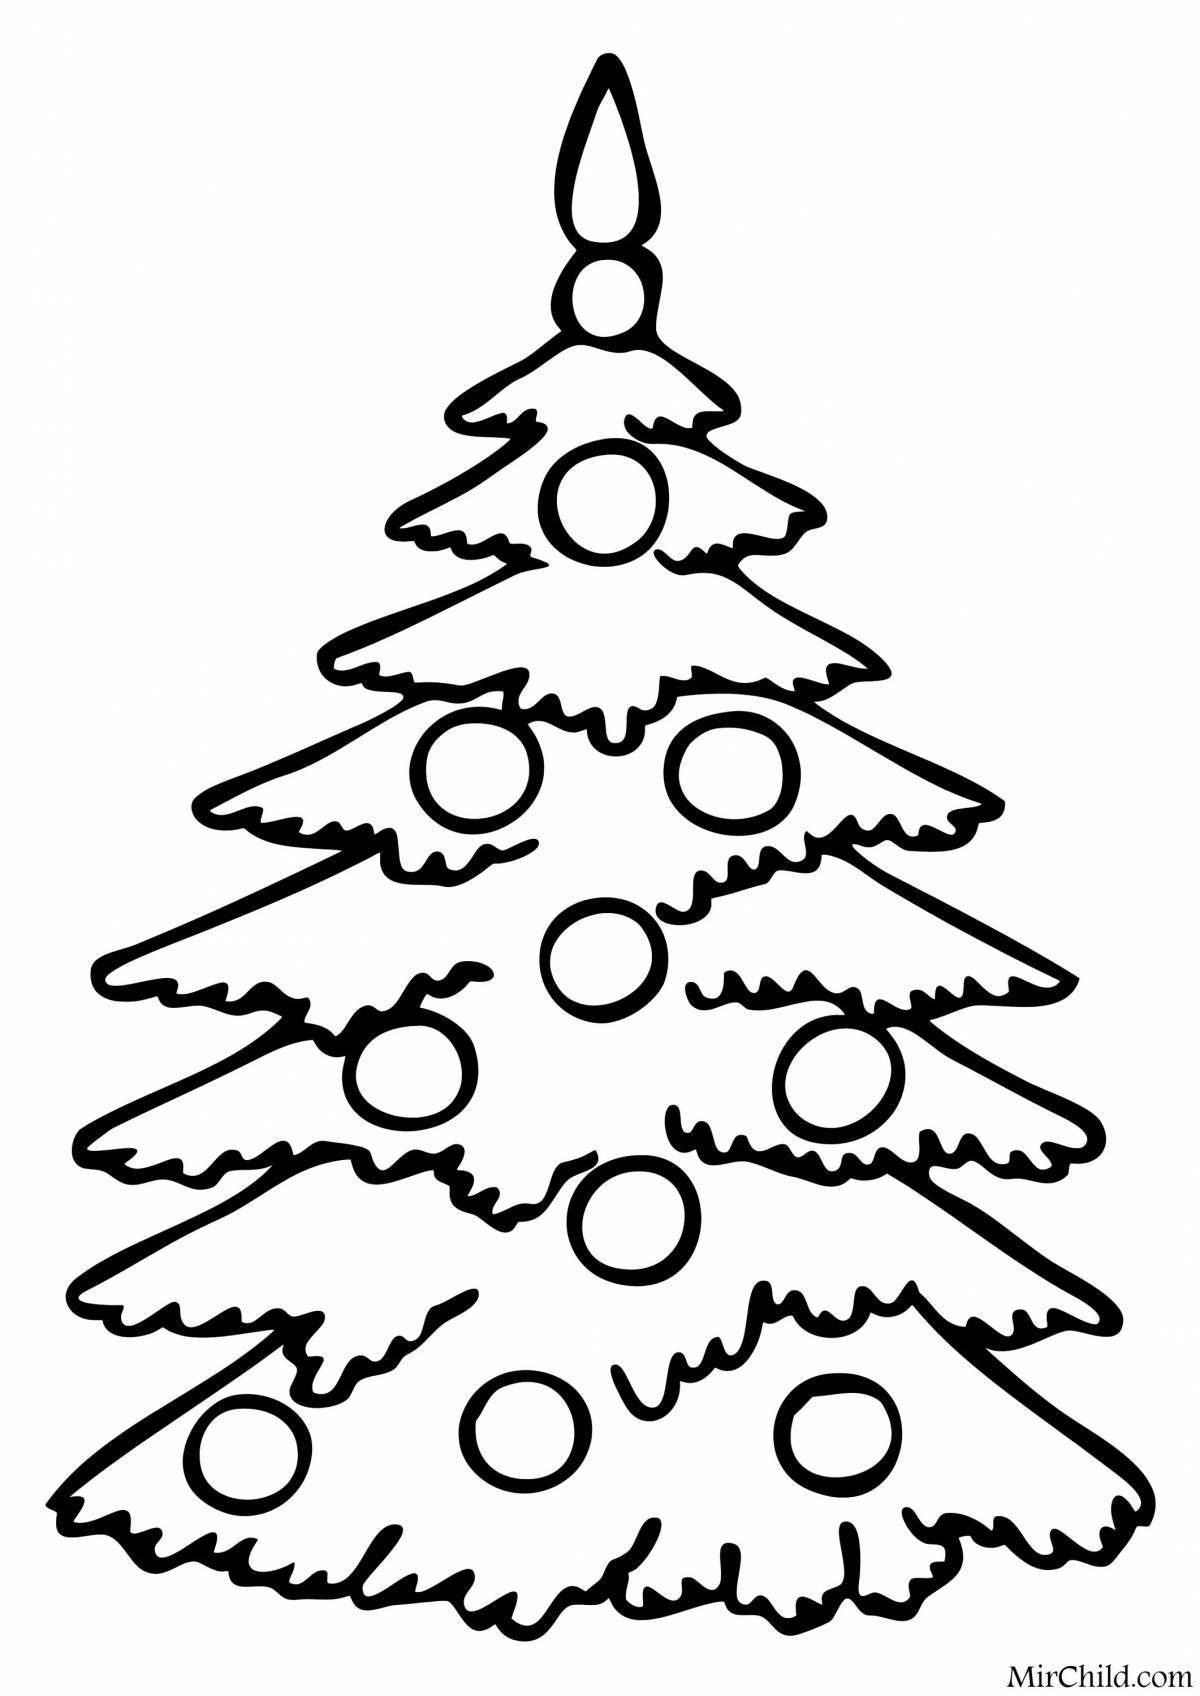 Children's shiny Christmas tree coloring book